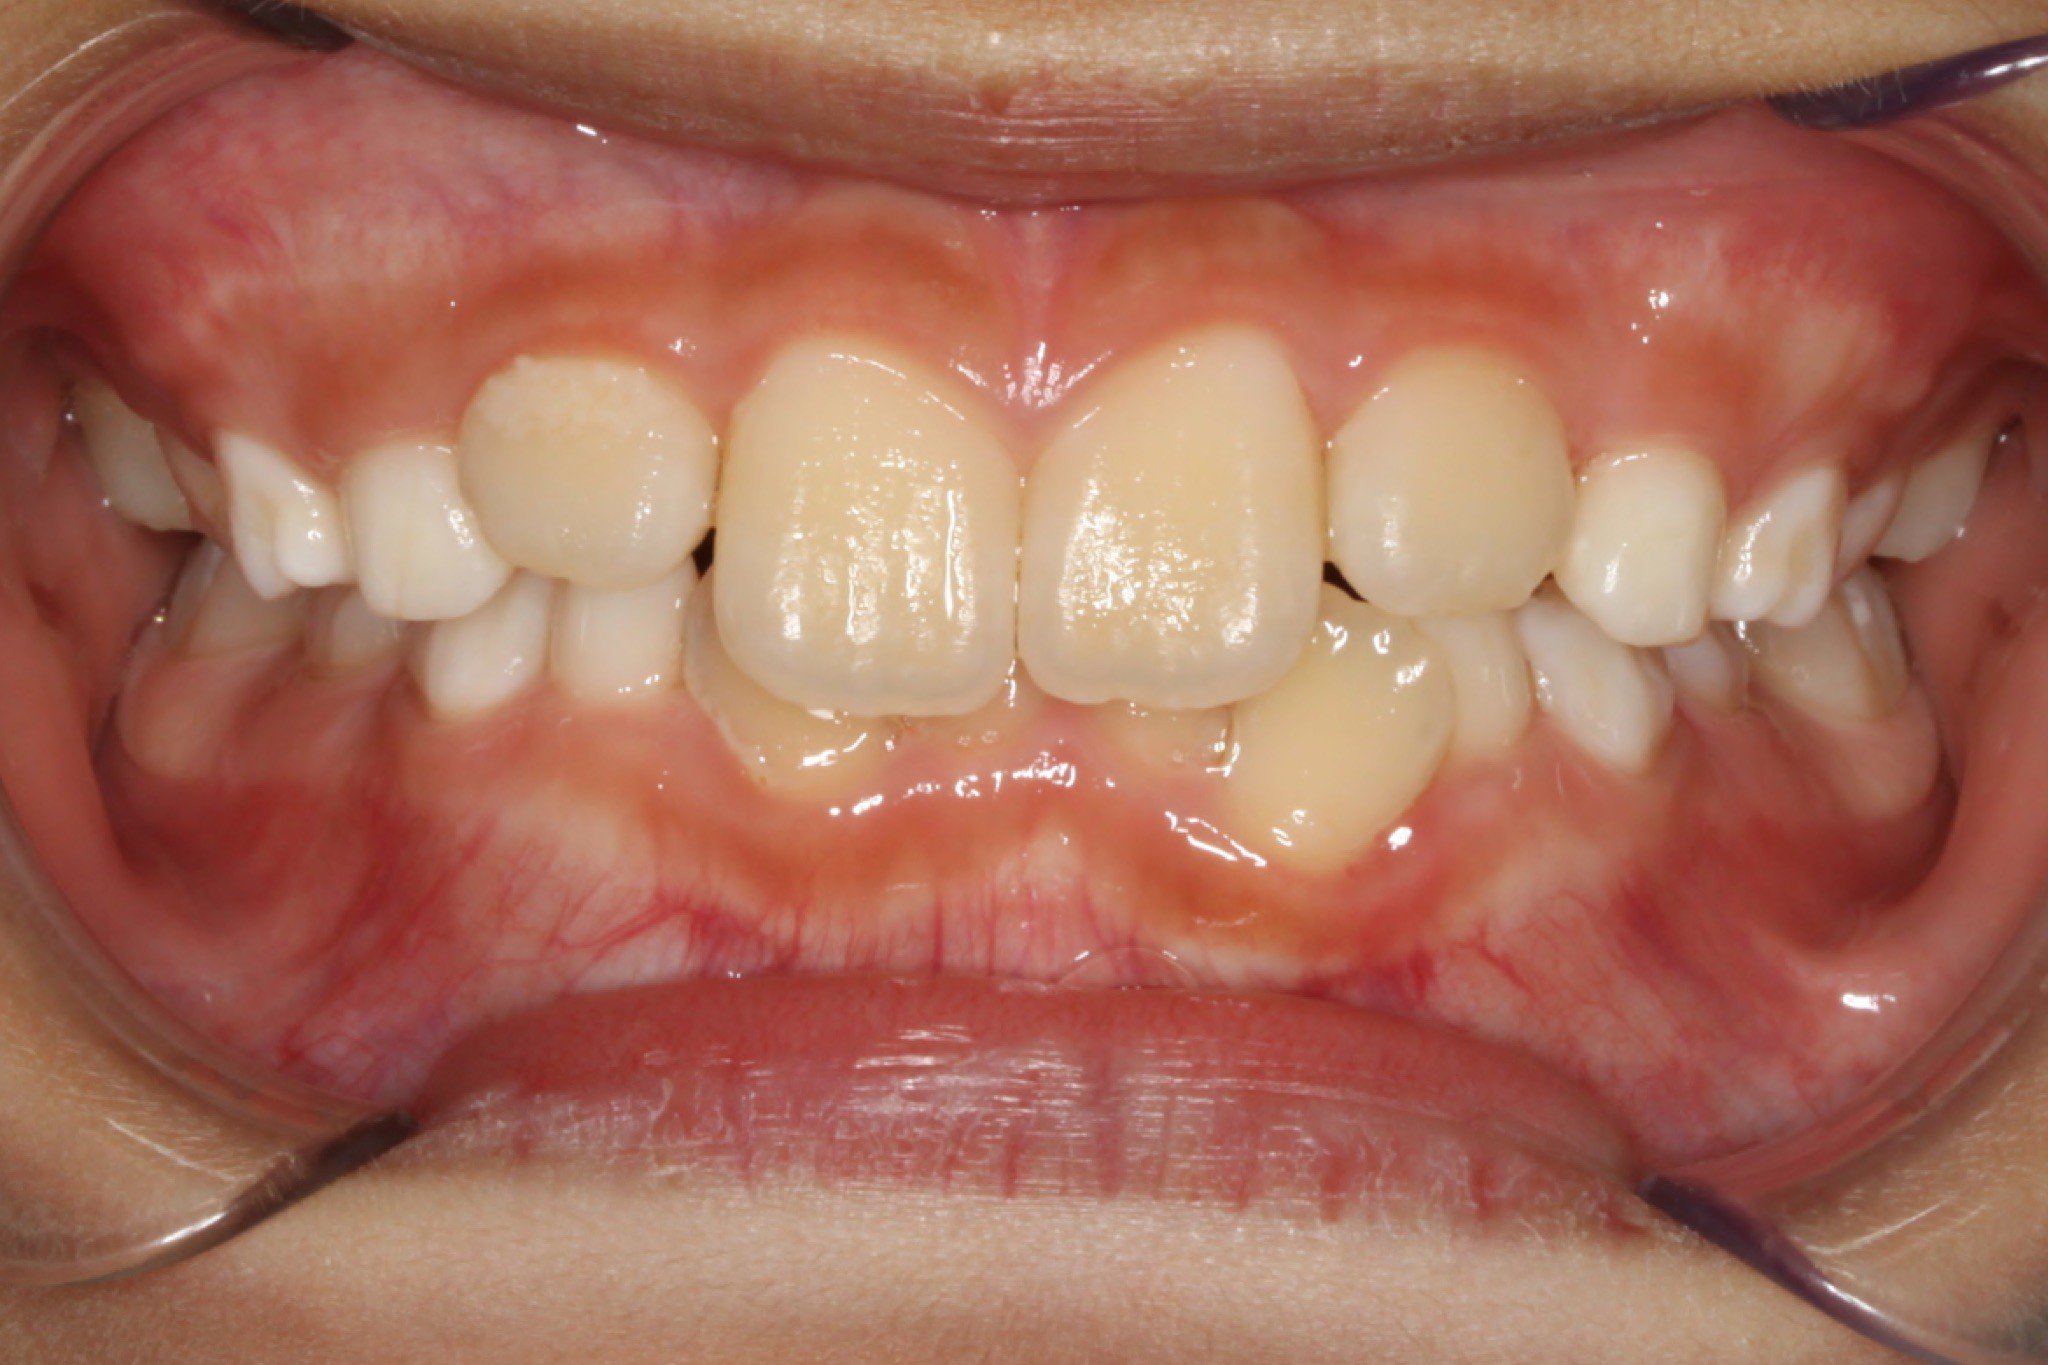 After photo: Fully erupted, straightened upper teeth